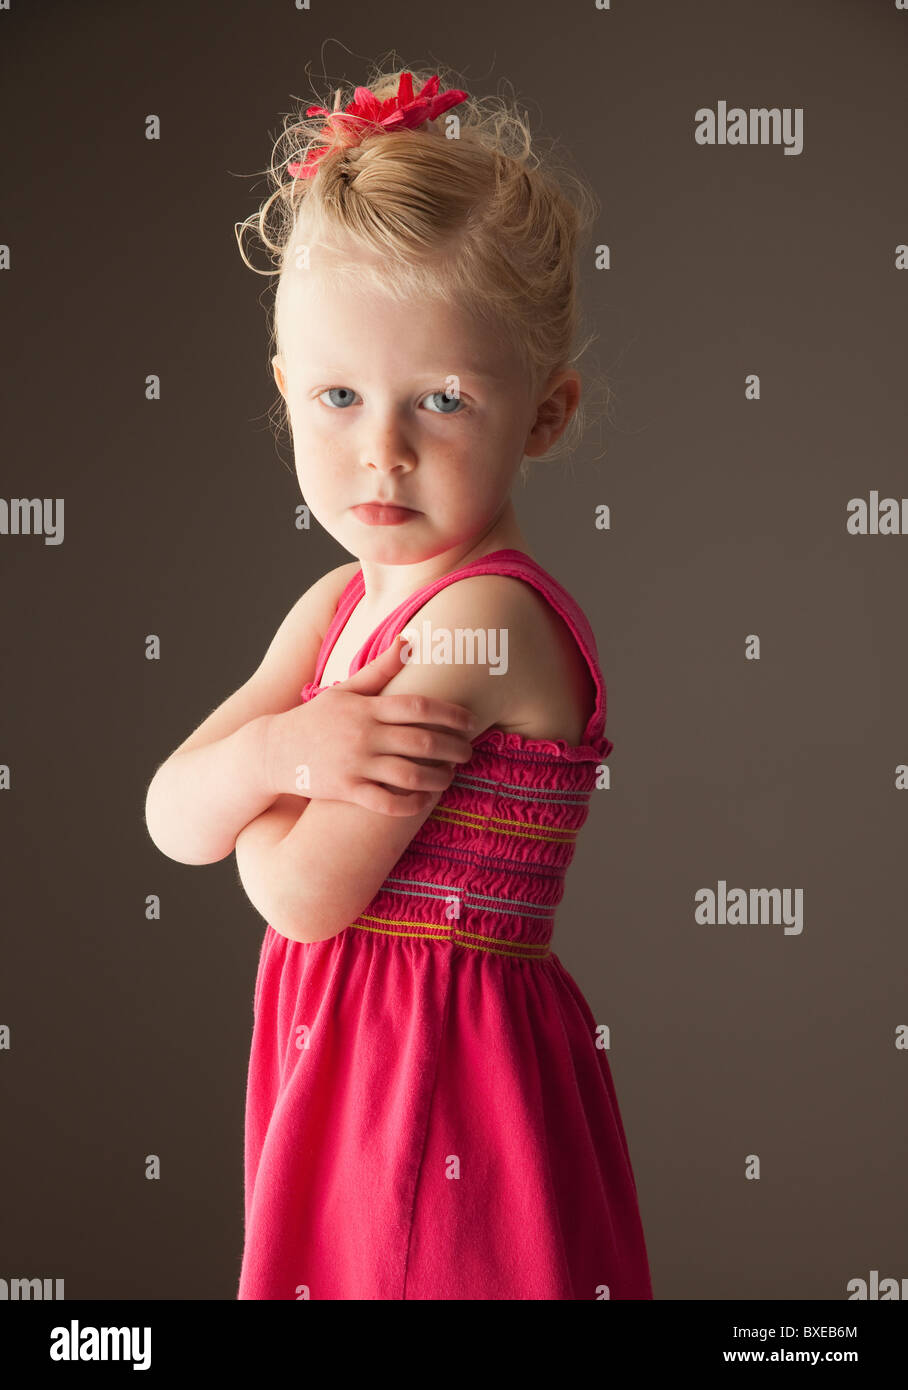 Pouting young girl Stock Photo